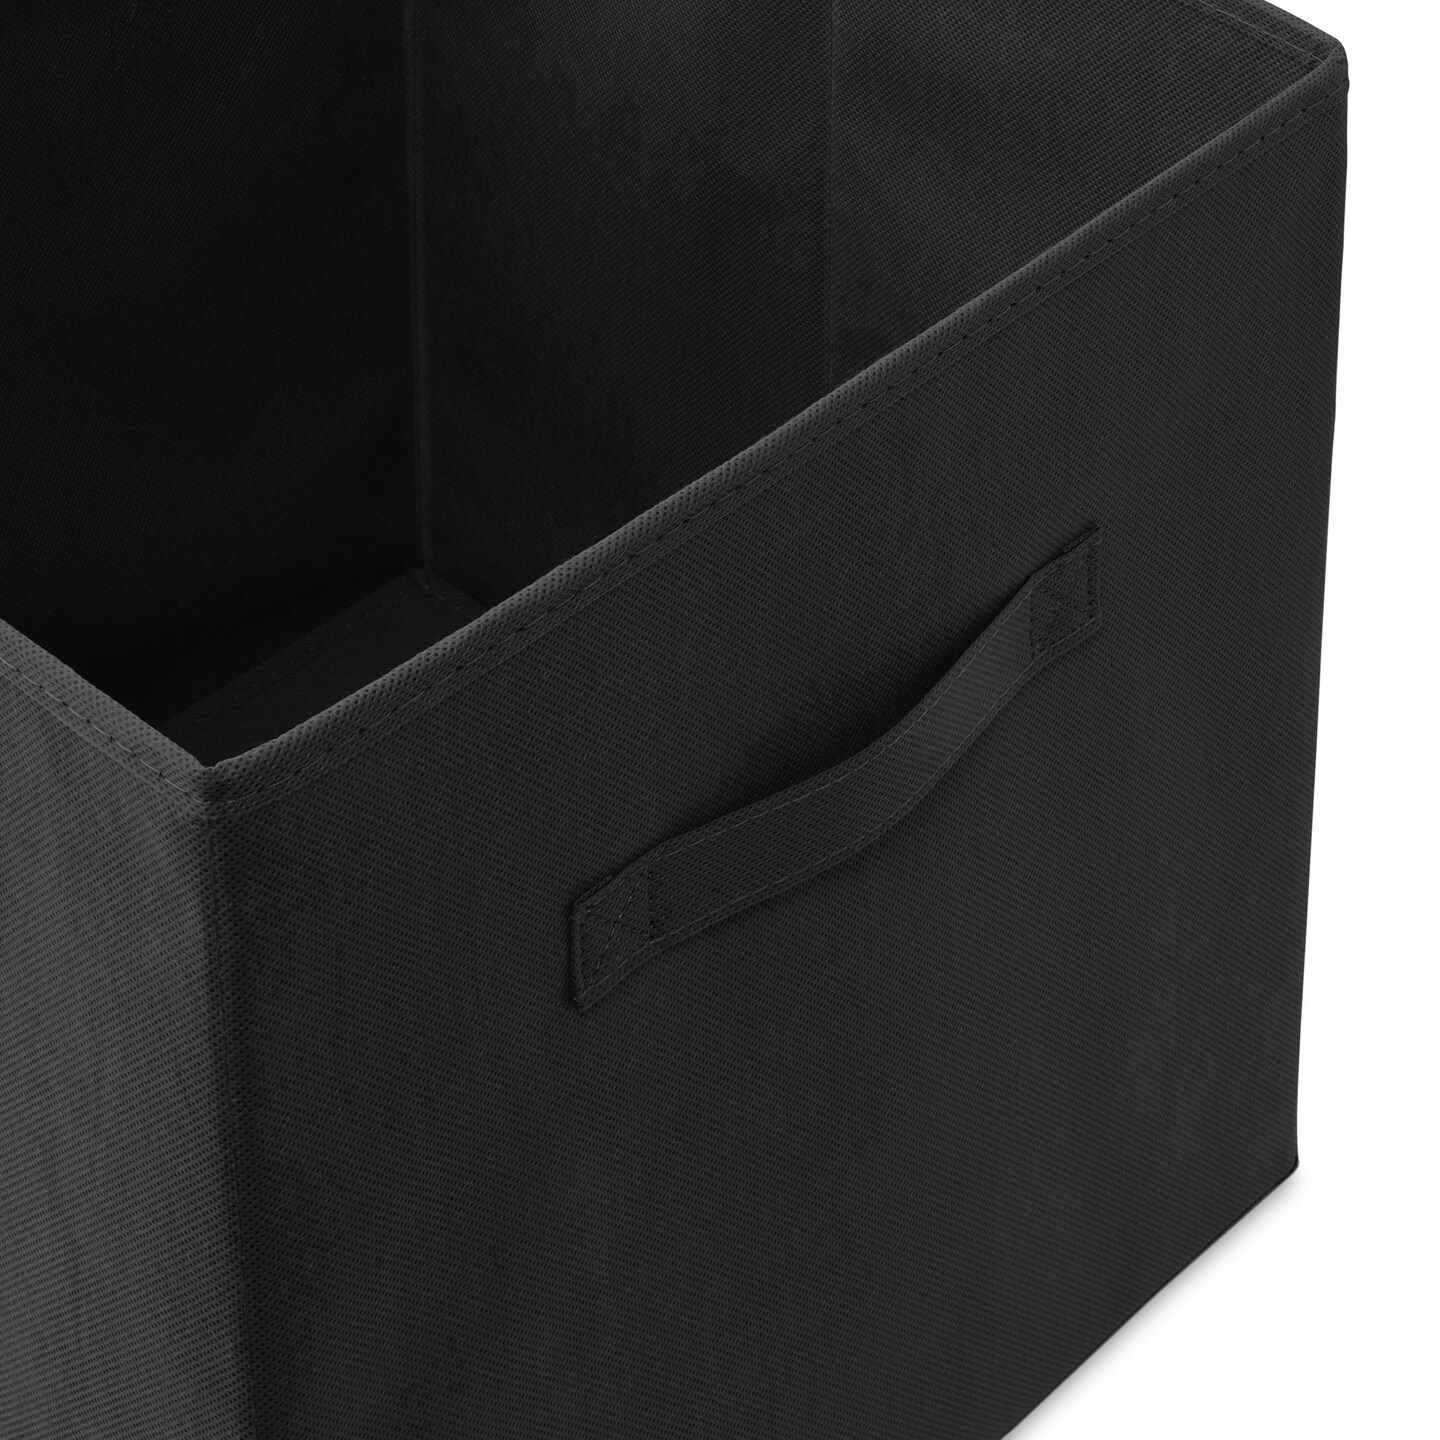 Casafield Set of 6 Collapsible Fabric Cube Storage Bins - Foldable Cloth Baskets for Shelves, Cubby Organizers &#x26; More